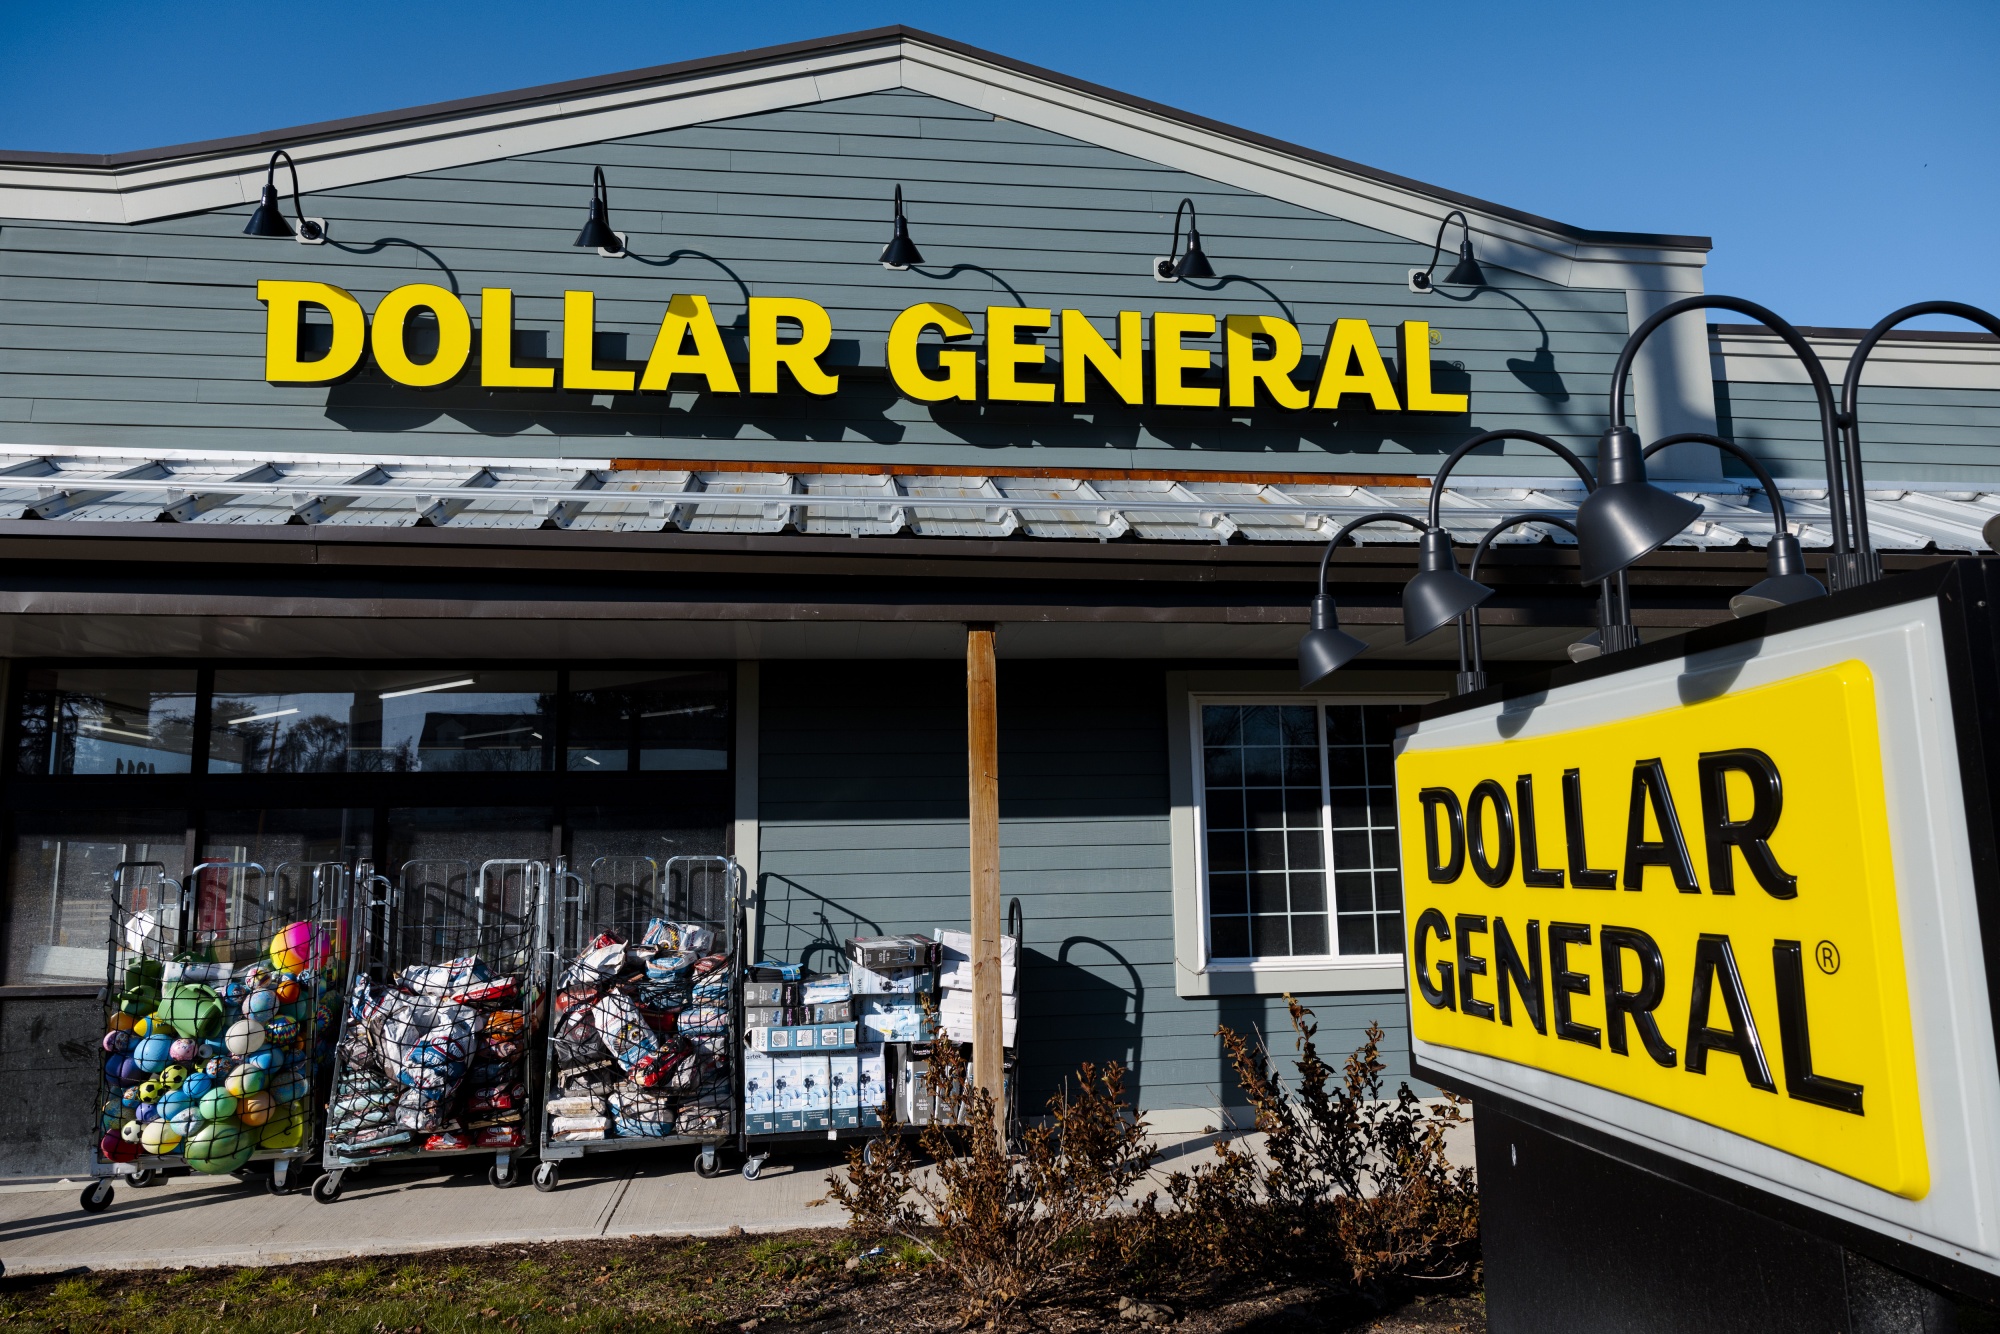 Dollar General Says It Now Sells More Things For $1 Than Dollar